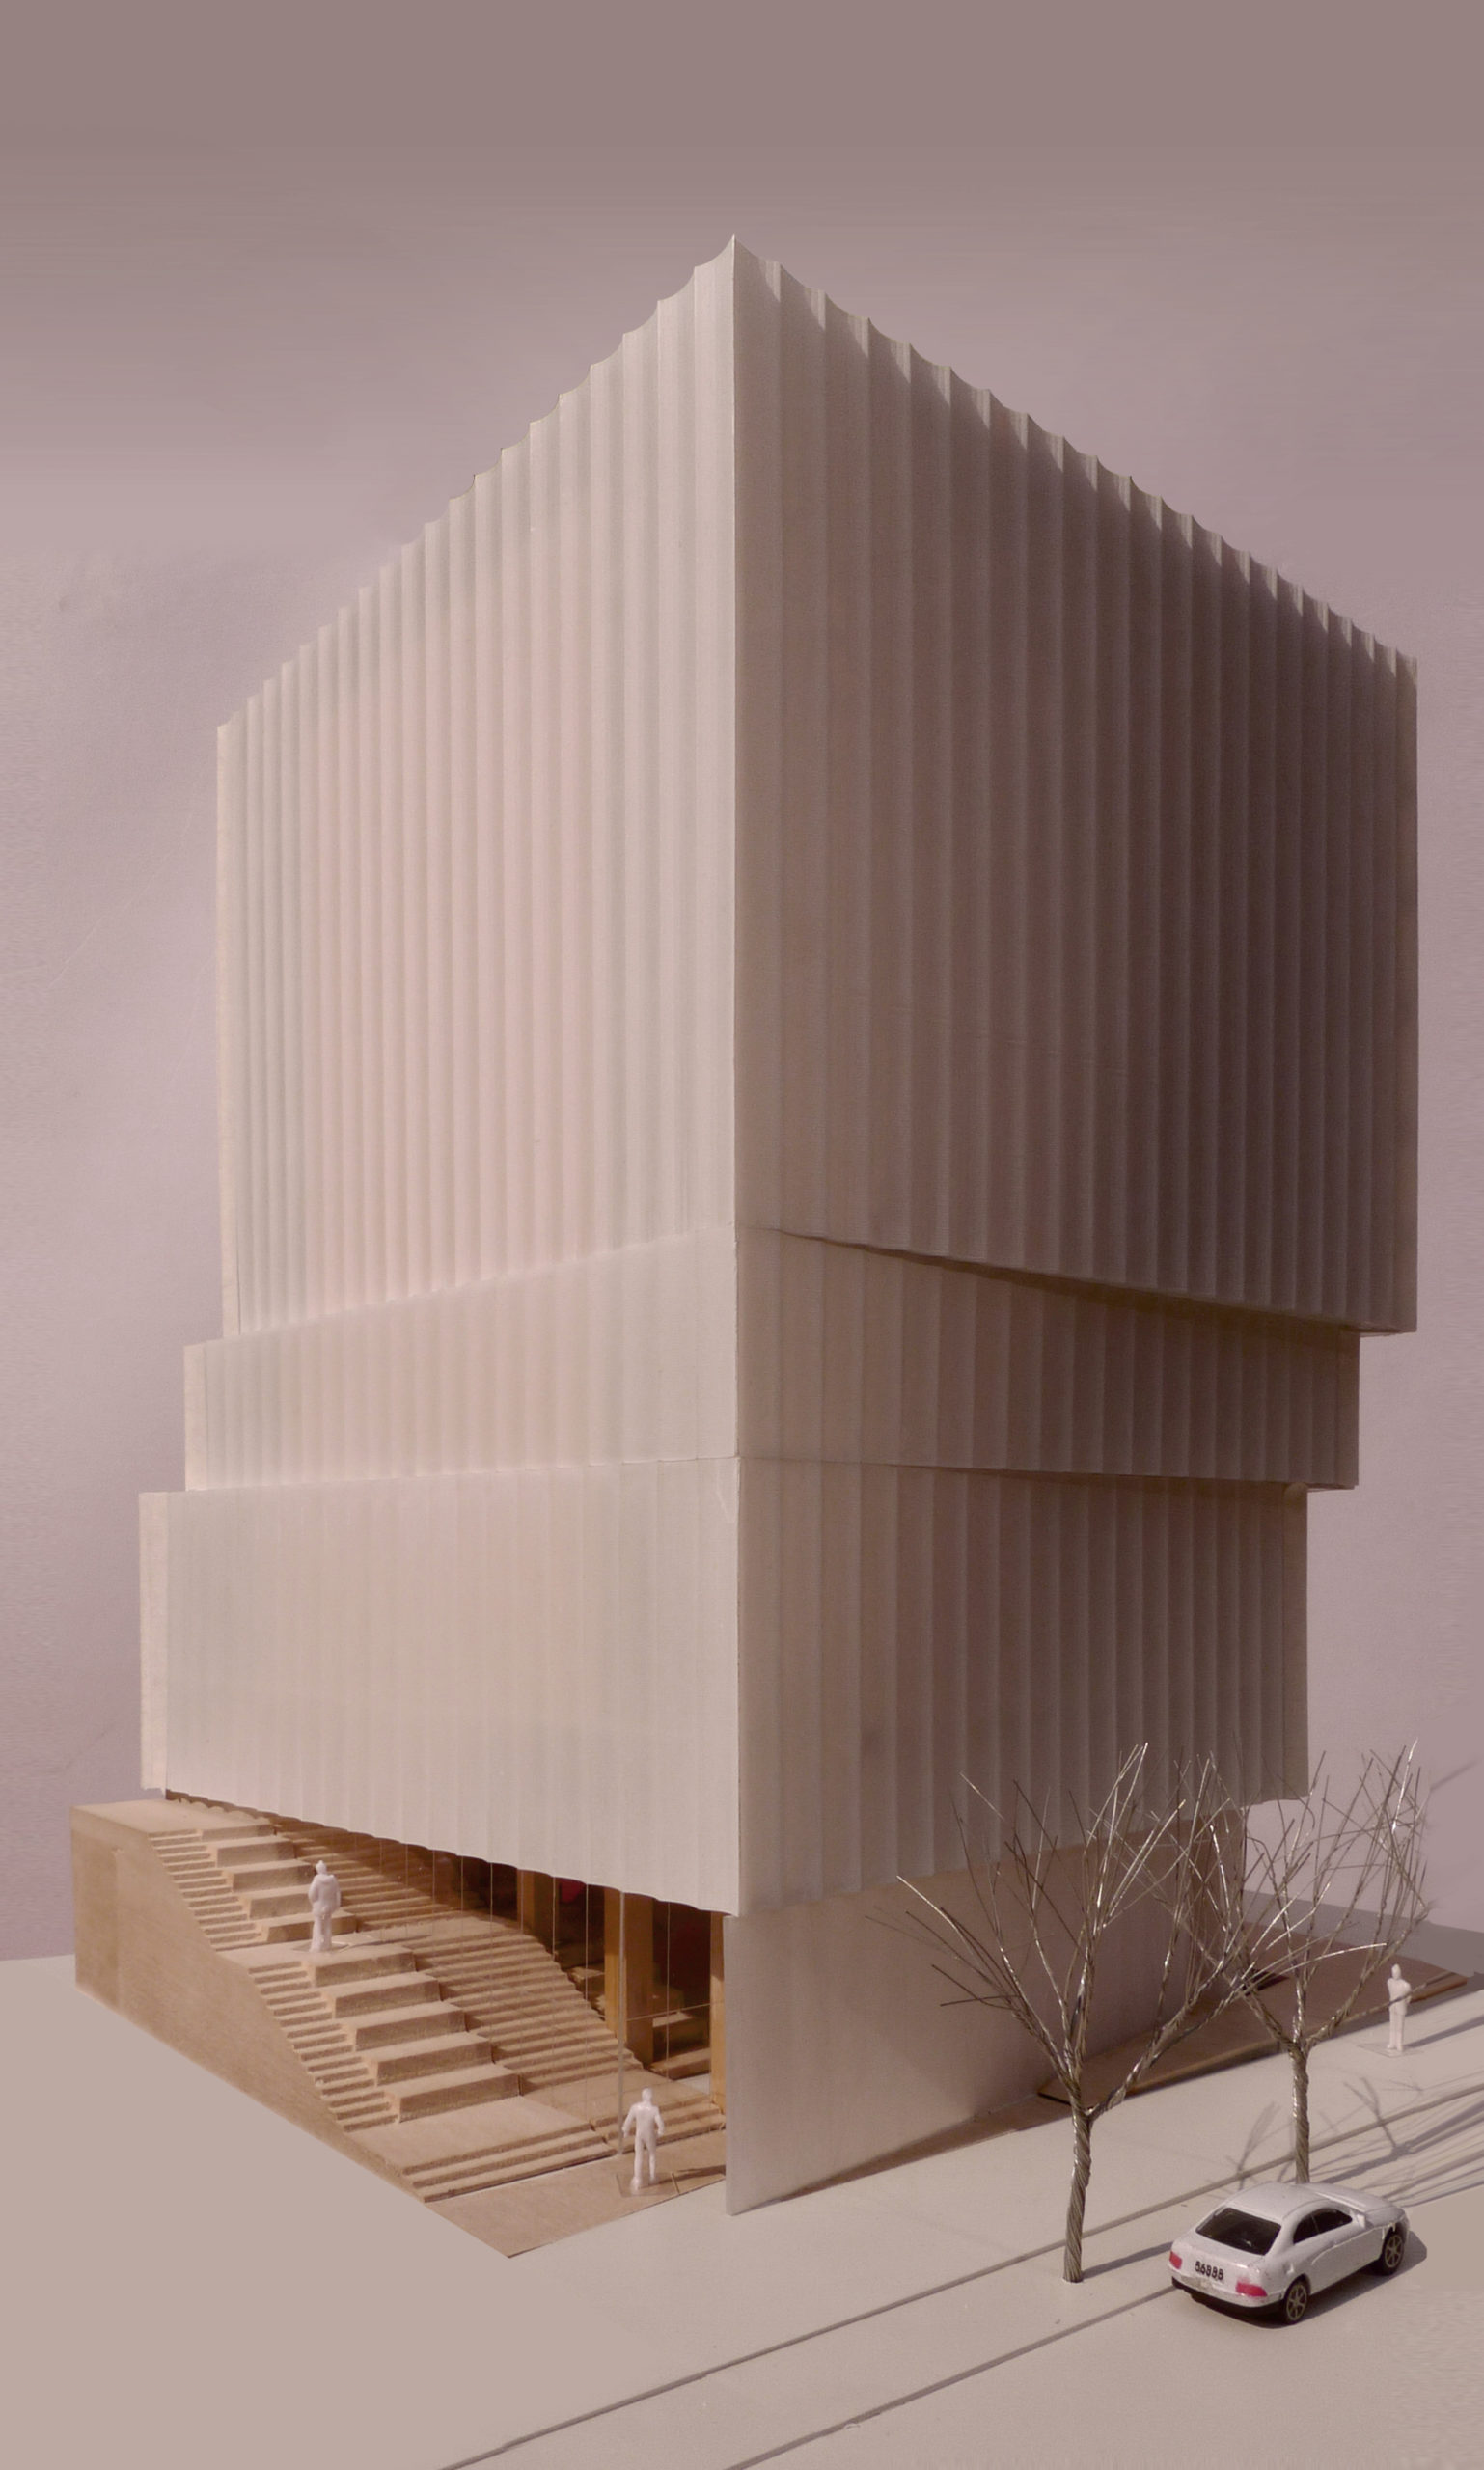 spatial practice architecture office Los Angeles Hong Kong taiwan lighting showroom taichung taiwan model facade on off